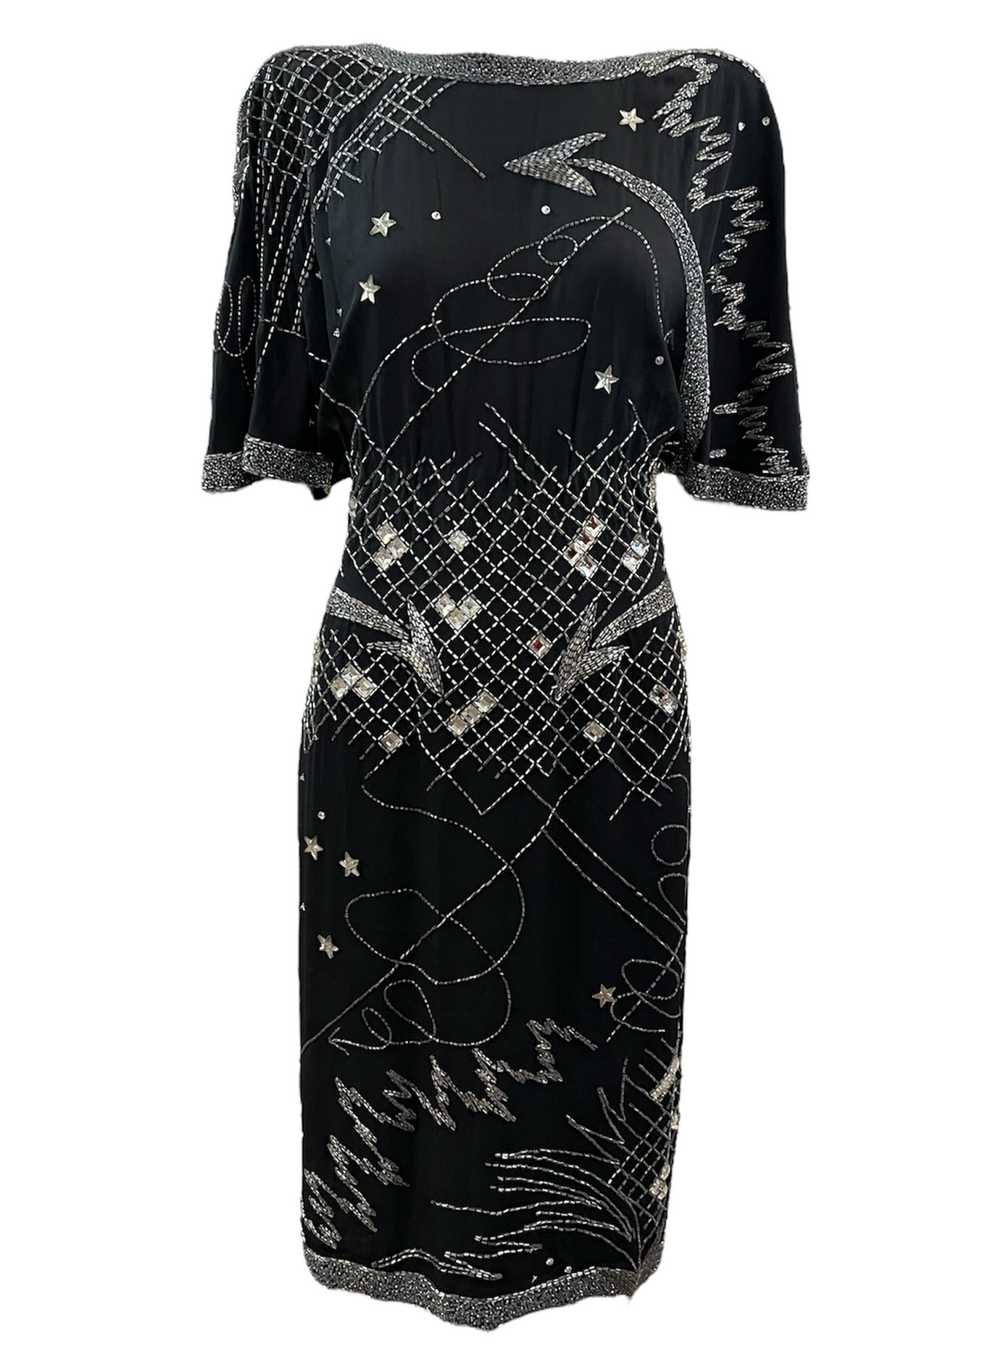 Fabrice 80s Black Beaded Cocktail Dress with Stars - image 1